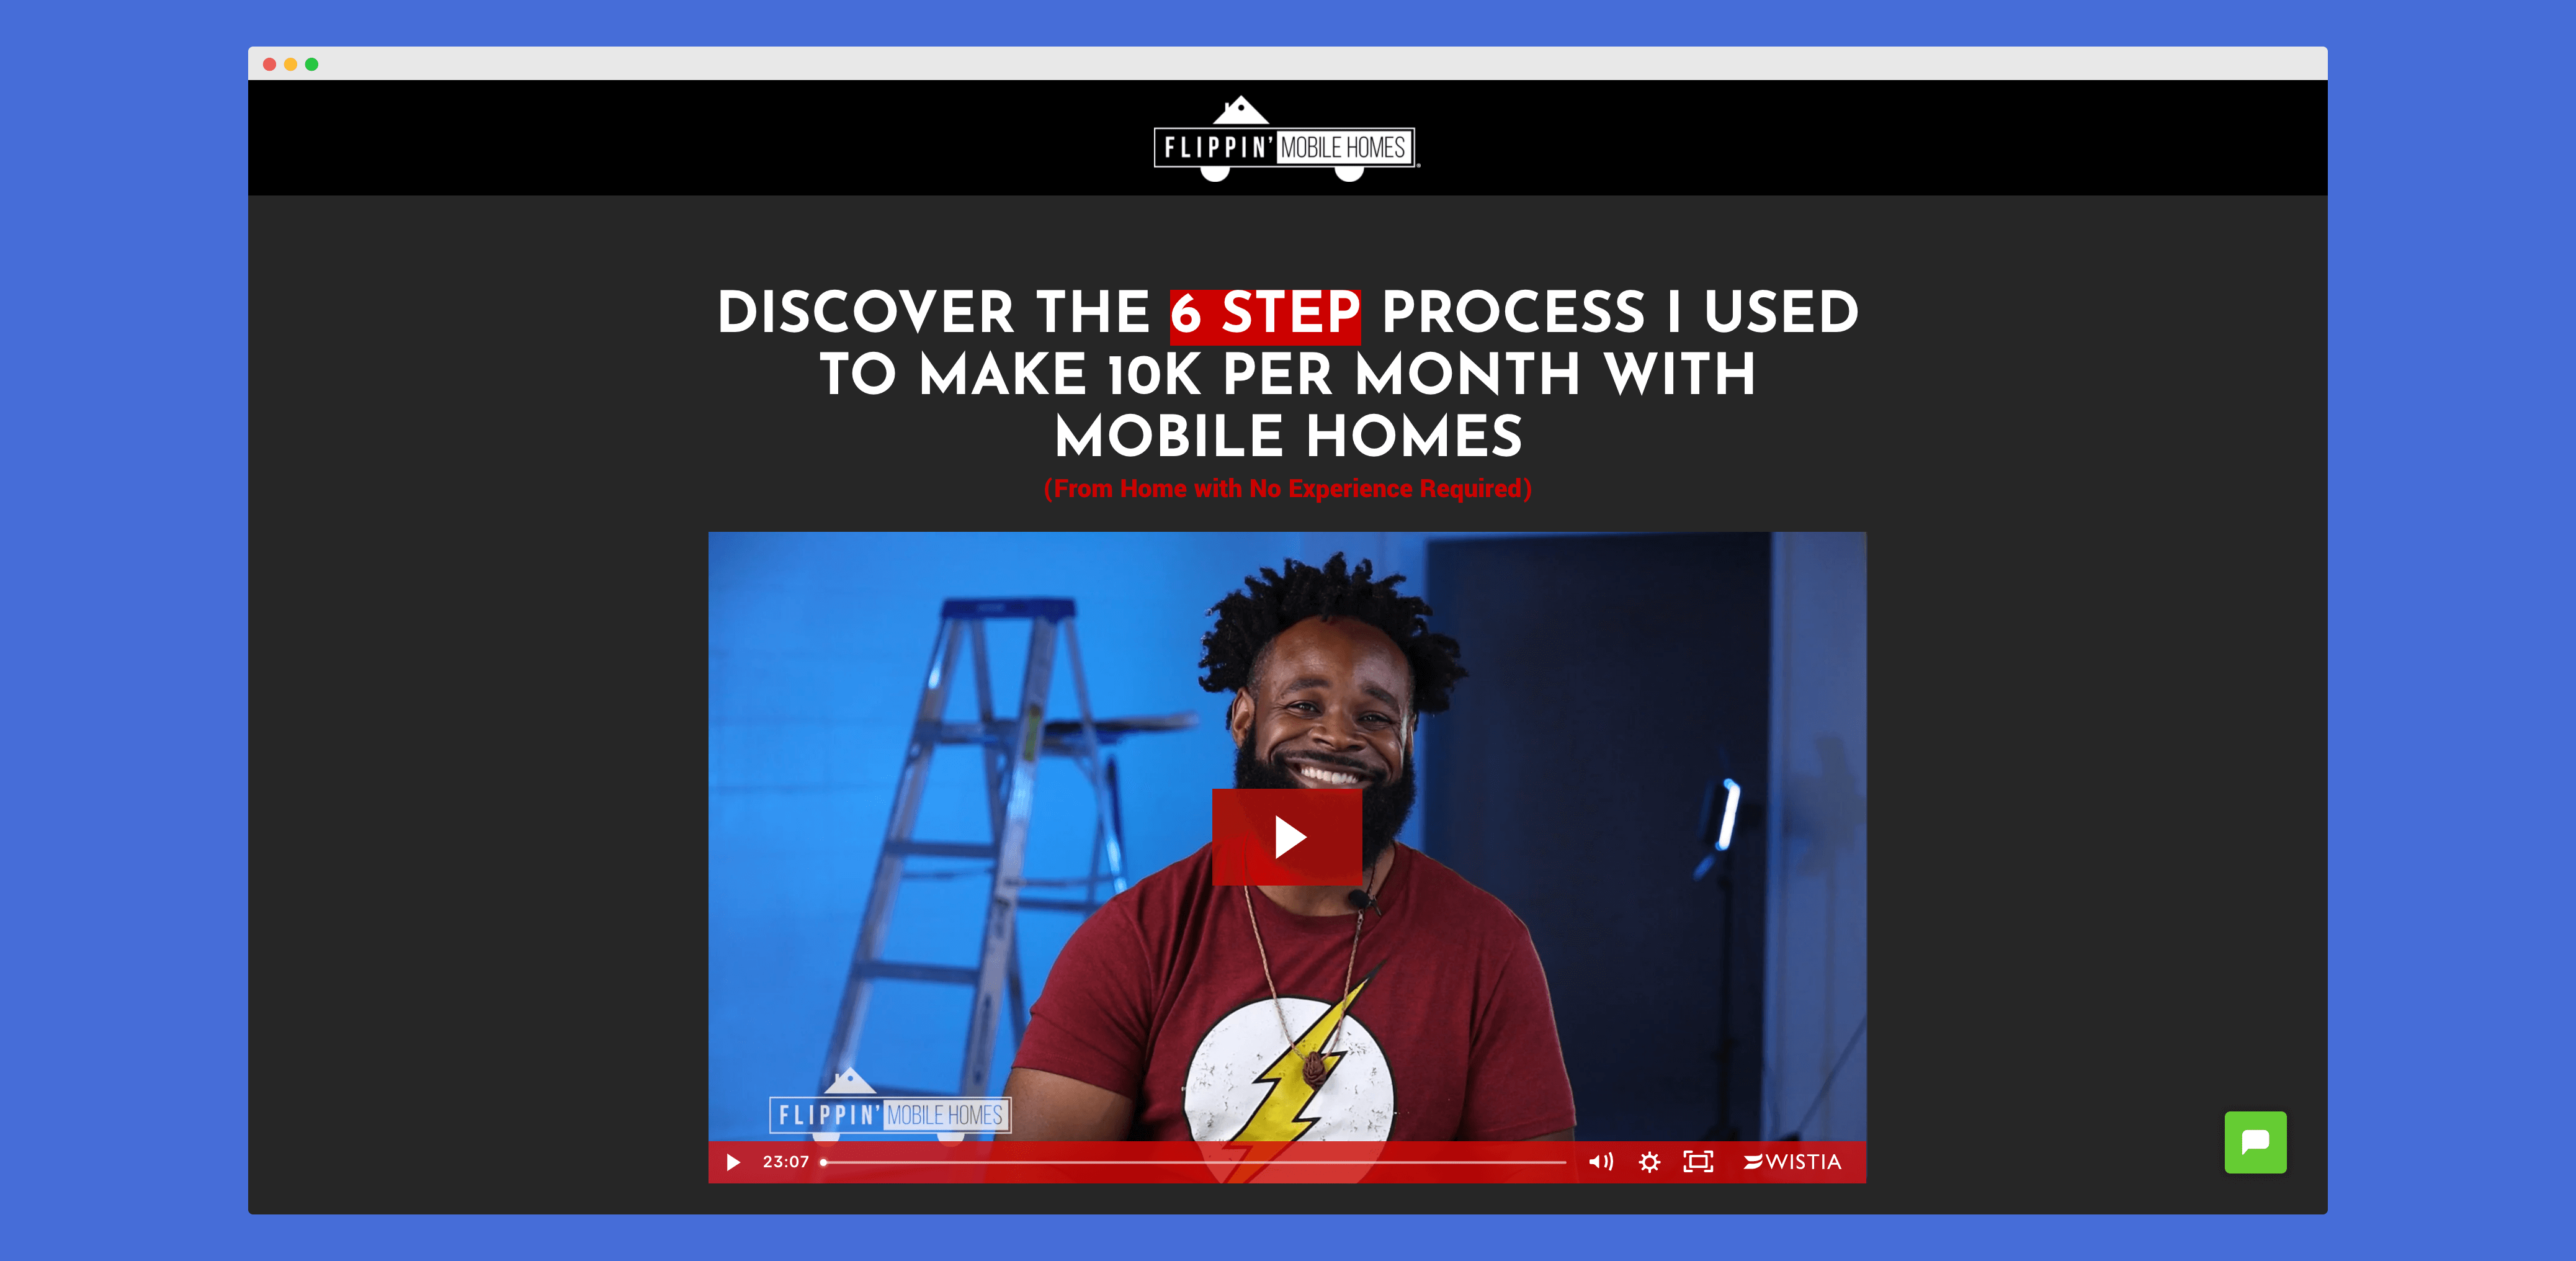 Michael threw himself into learning the ins and outs of this unique niche--flipping mobile homes for profit, finding that a mobile home could be purchased for a nominal price and then sold at a significant markup upwards of 100%. As he learned more, he started noticing opportunities that he had never noticed before. He refers to the Reticular Activating System, a neurological response where one notices seemingly coincidental opportunities—a phenomenon he heard about from Tony Robbins, one of the many marketing and business leaders he pays attention to—to describe how he suddenly saw mobile homes everywhere. Once that happened, he started seeking out potential sellers. What makes the mobile home niche so special is that it allows for business opportunities that might not be available to those without the resources to make entry into traditional real estate. After one year, Michael decided on his next step, sharing his newfound knowledge.